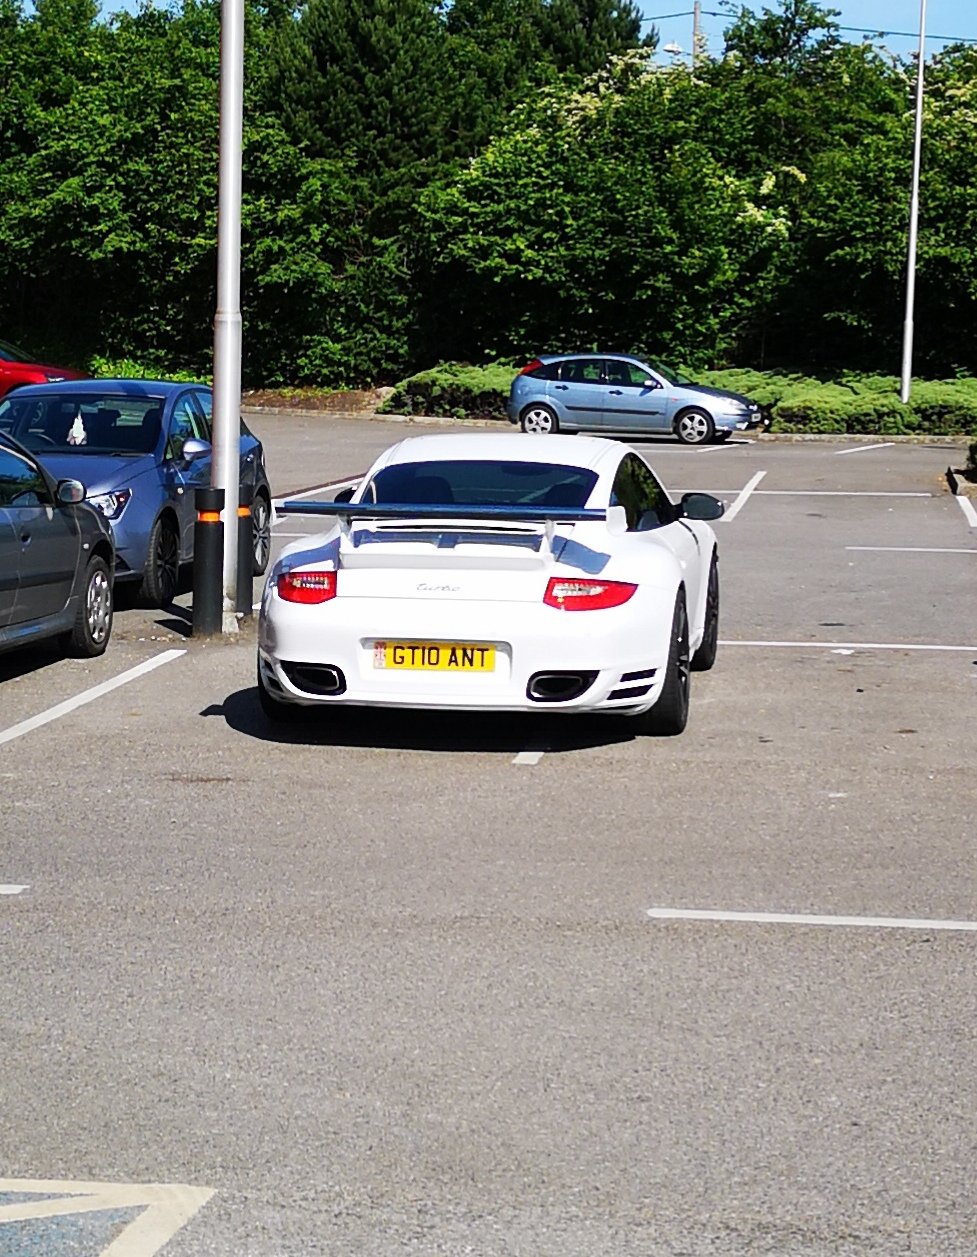 GT10 ANT is an Inconsiderate Parker